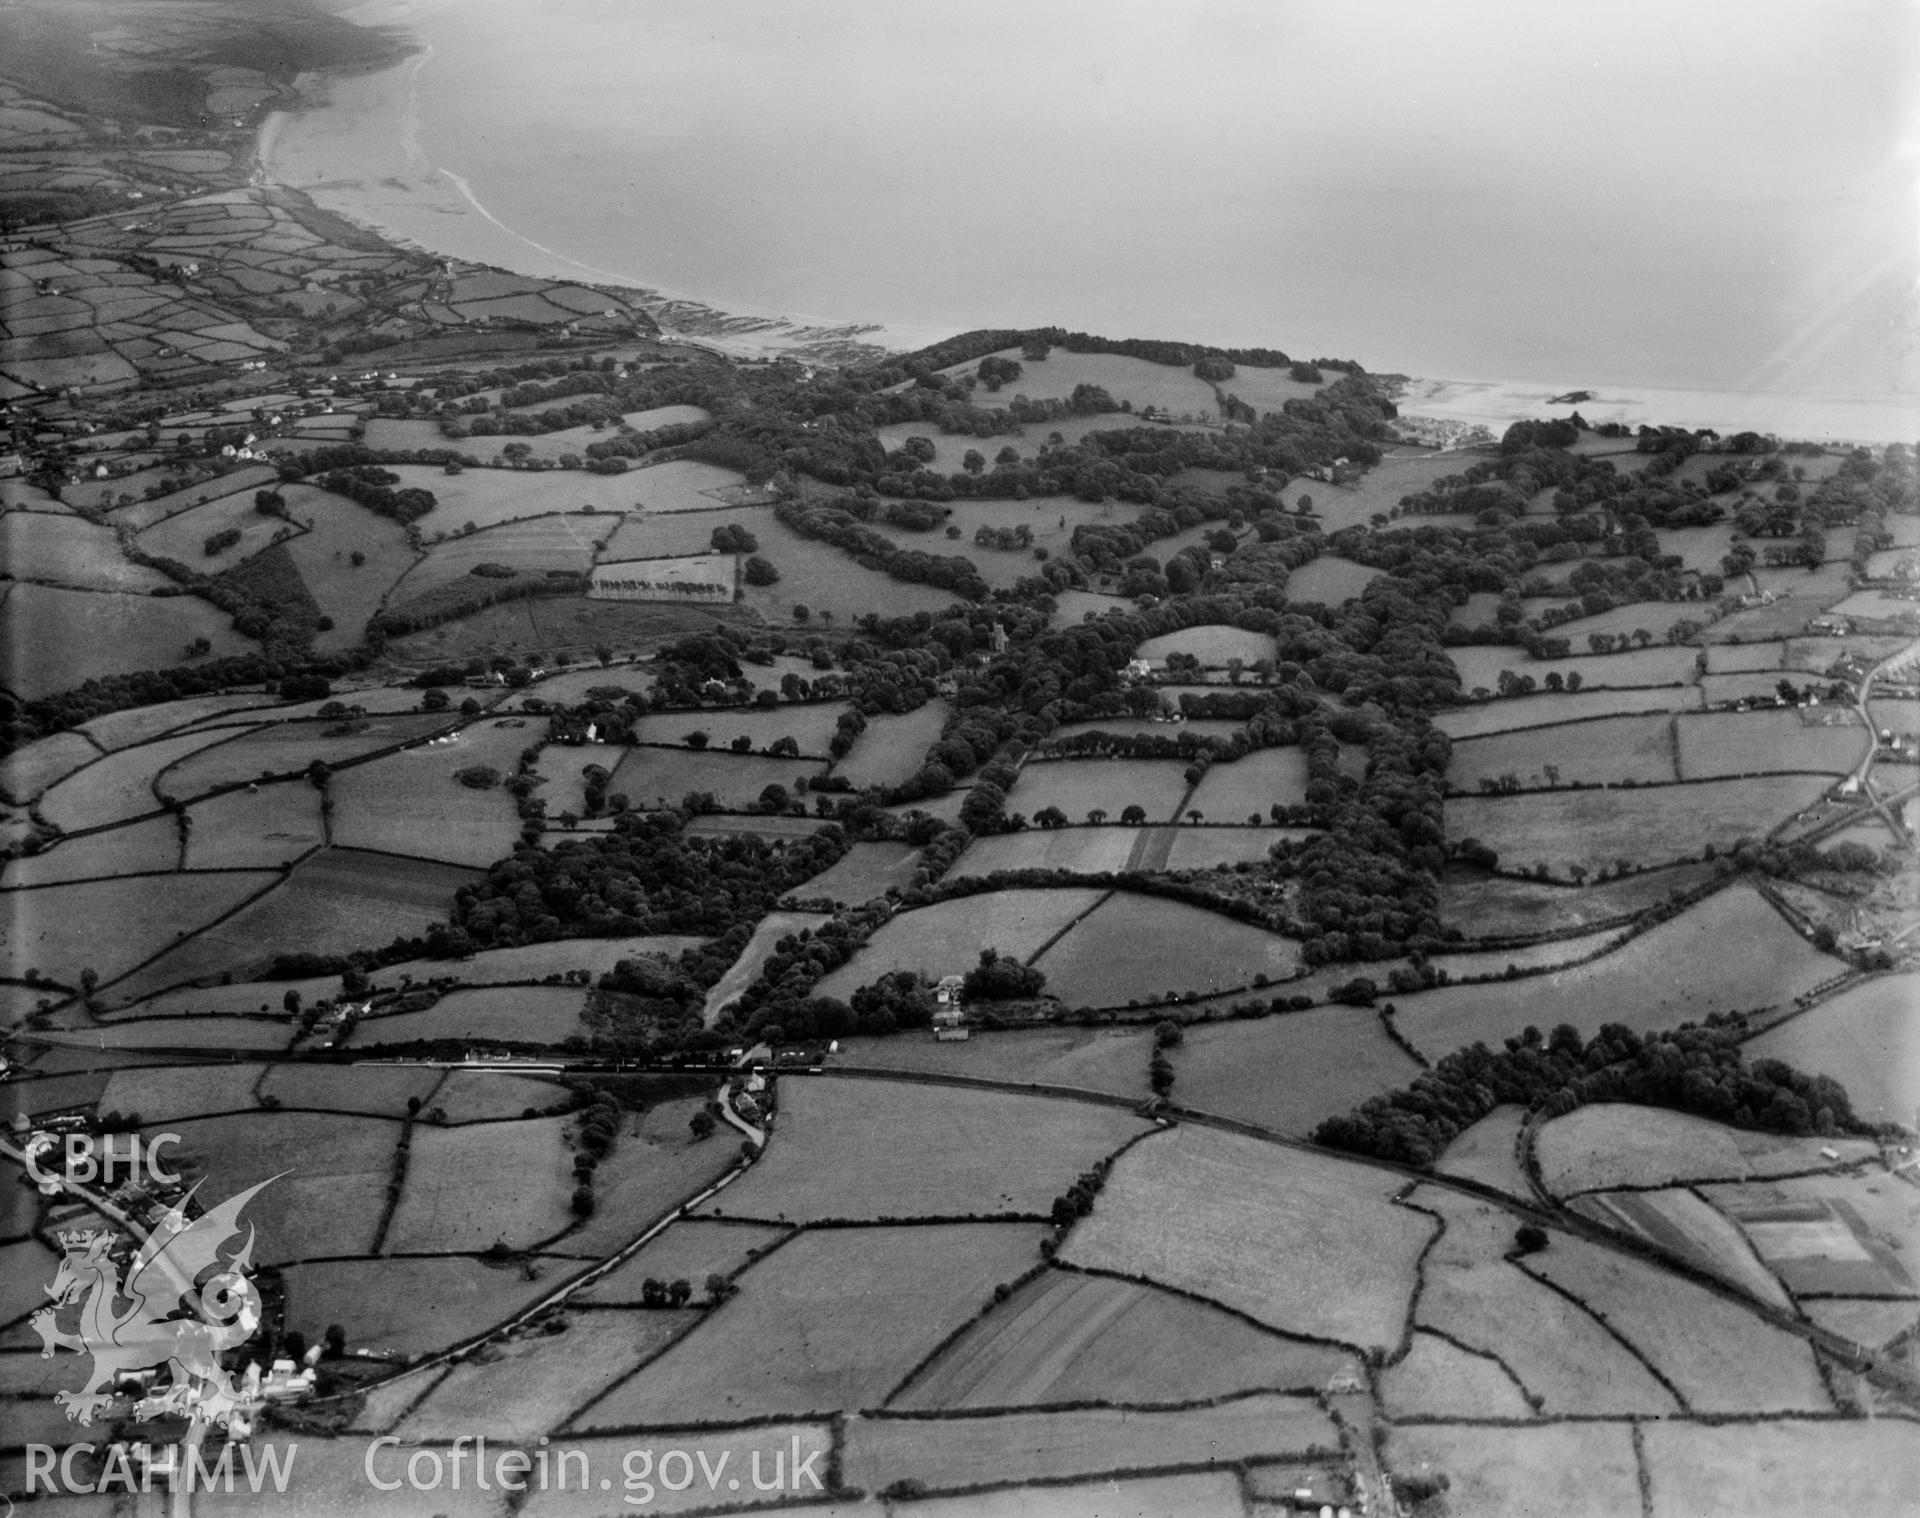 View of landscape near Hean Castle, Saundersfoot, oblique aerial view. 5?x4? black and white glass plate negative.